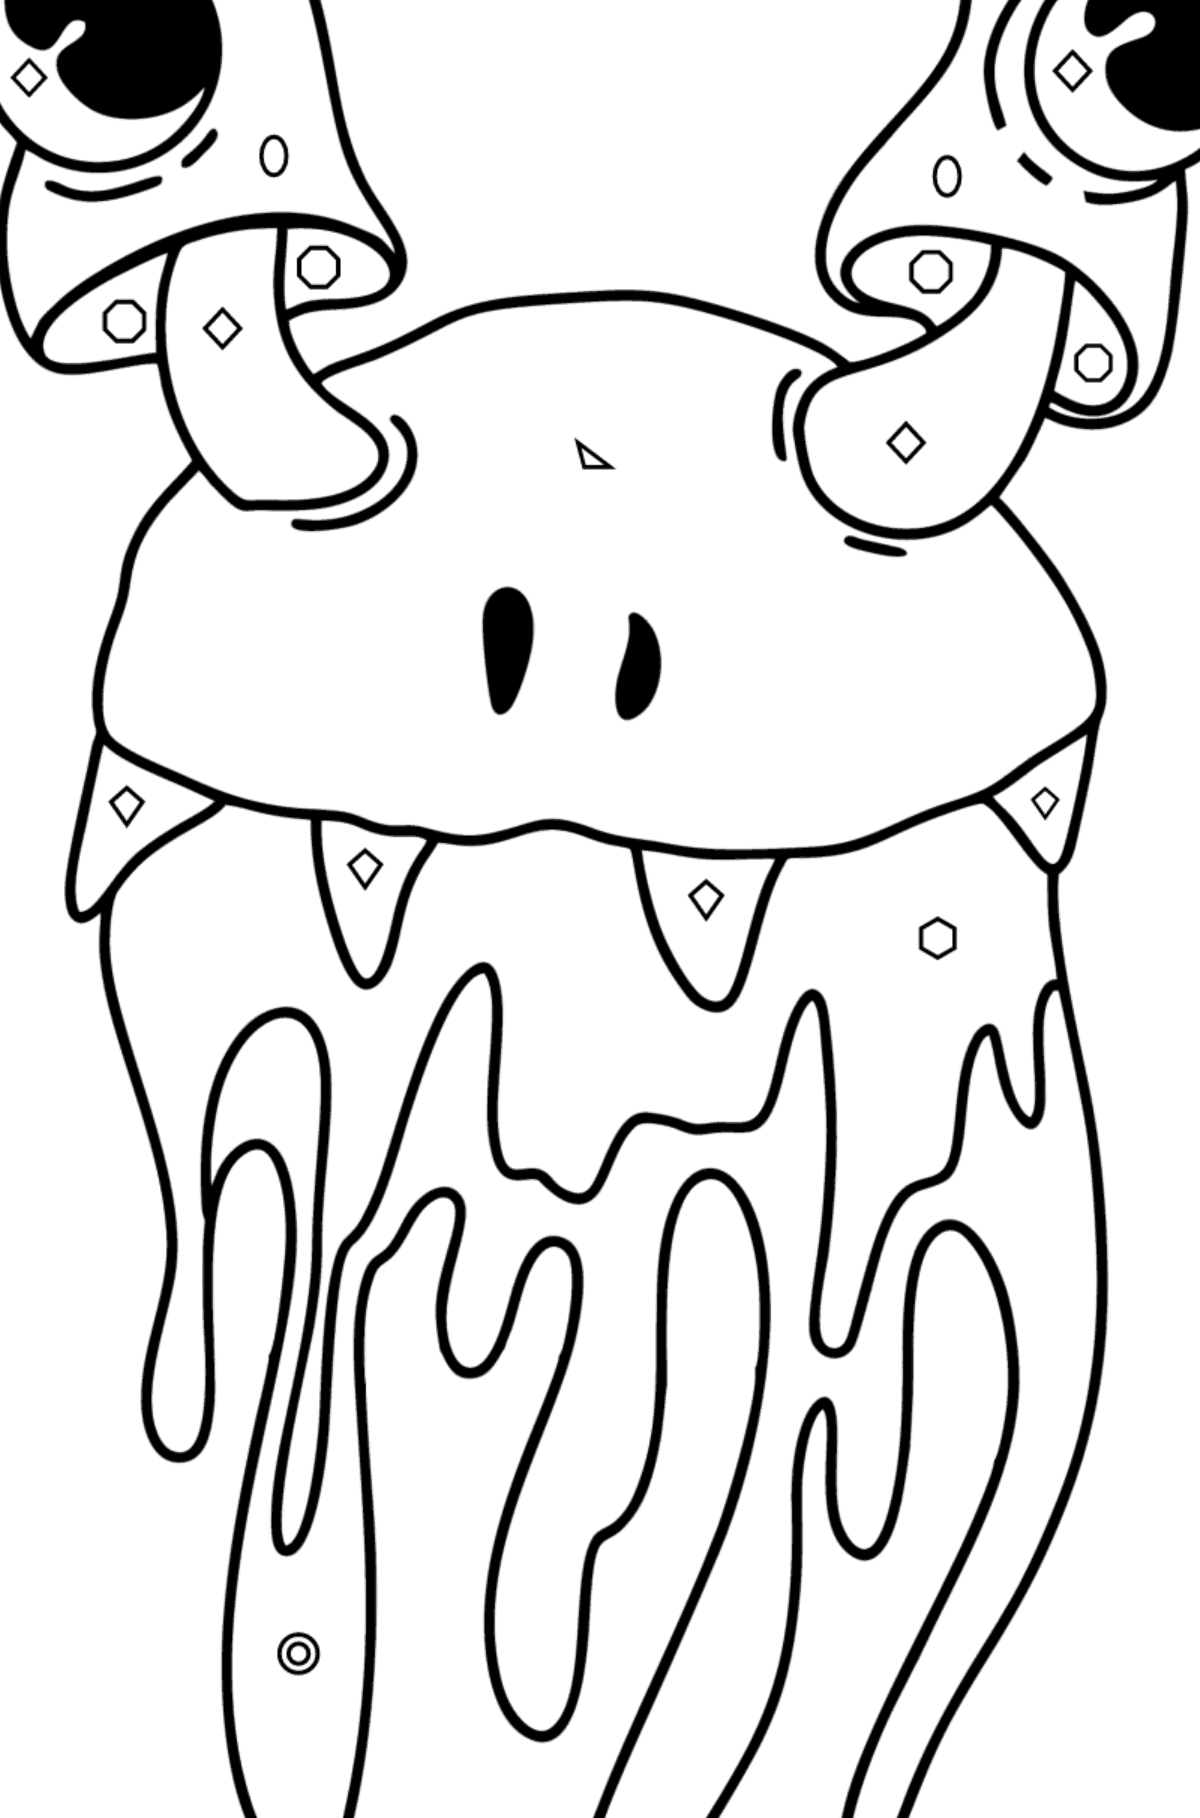 Cartoon monster face coloring page - Coloring by Geometric Shapes for Kids